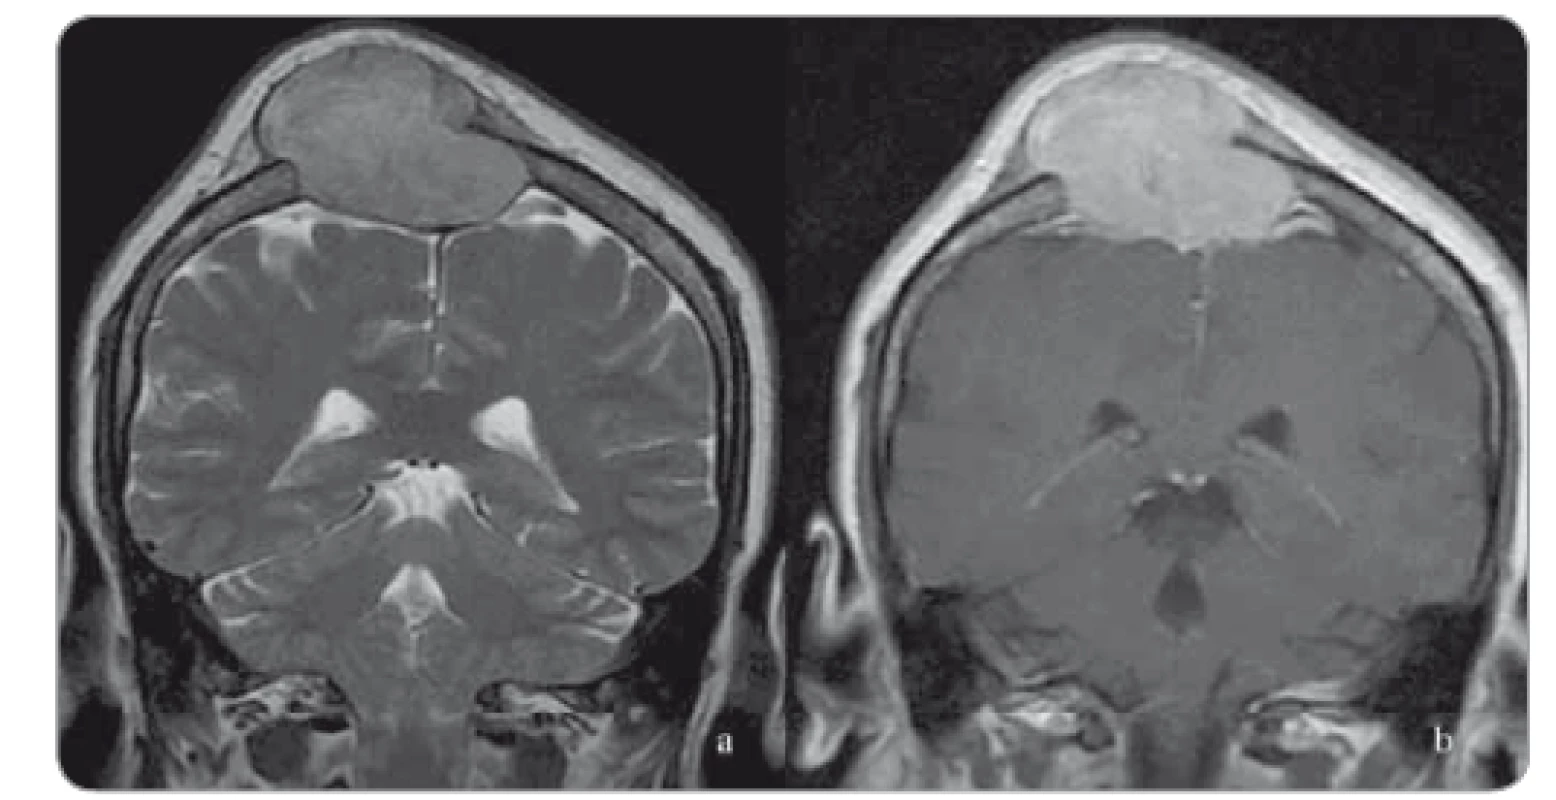 Coronal T2-weighted fast spin echo and sagittal contrast enhanced T1-weighted
MRI images show a calvarial expansile lytic lesion located at the right paramedian
frontoparietal region with an intense heterogenous contrast enhancement. There is
also compression and displacement of superior sagittal sinus without any finding of dural
invasion.